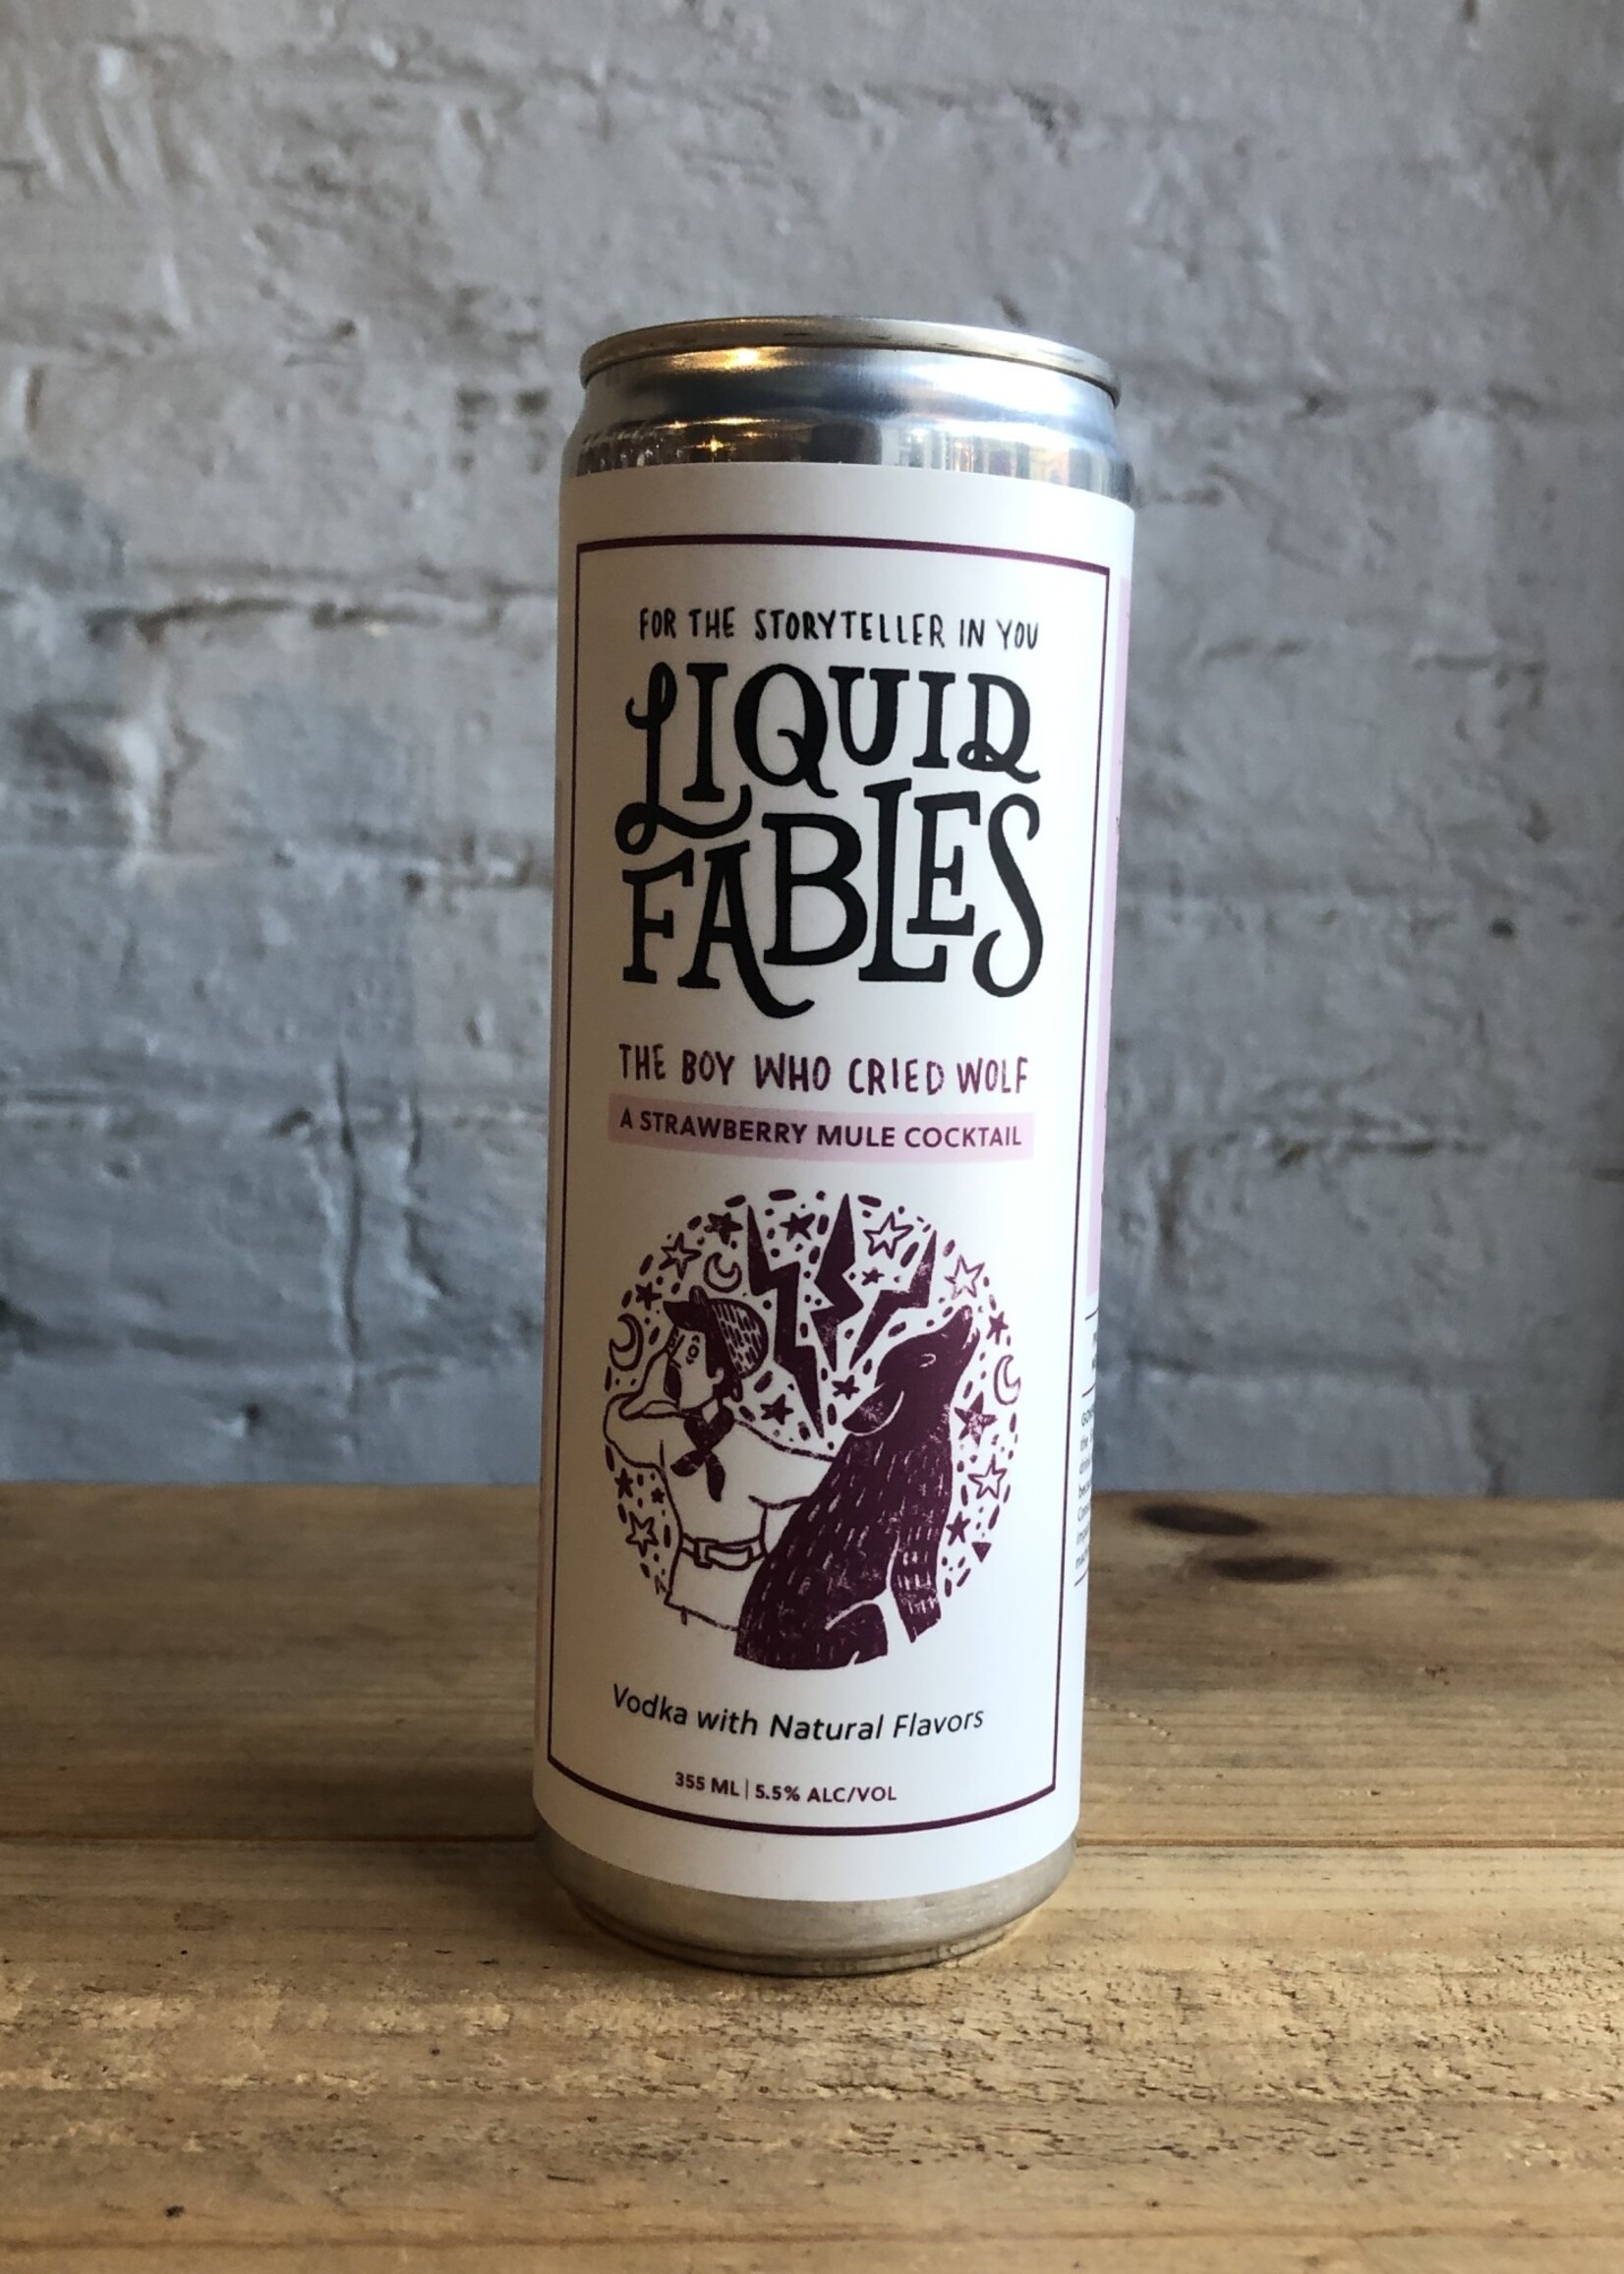 Liquid Fables The Boy Who Cried Wolf Strawberry & Ginger Cocktail - Beacon, NY (355ml can)